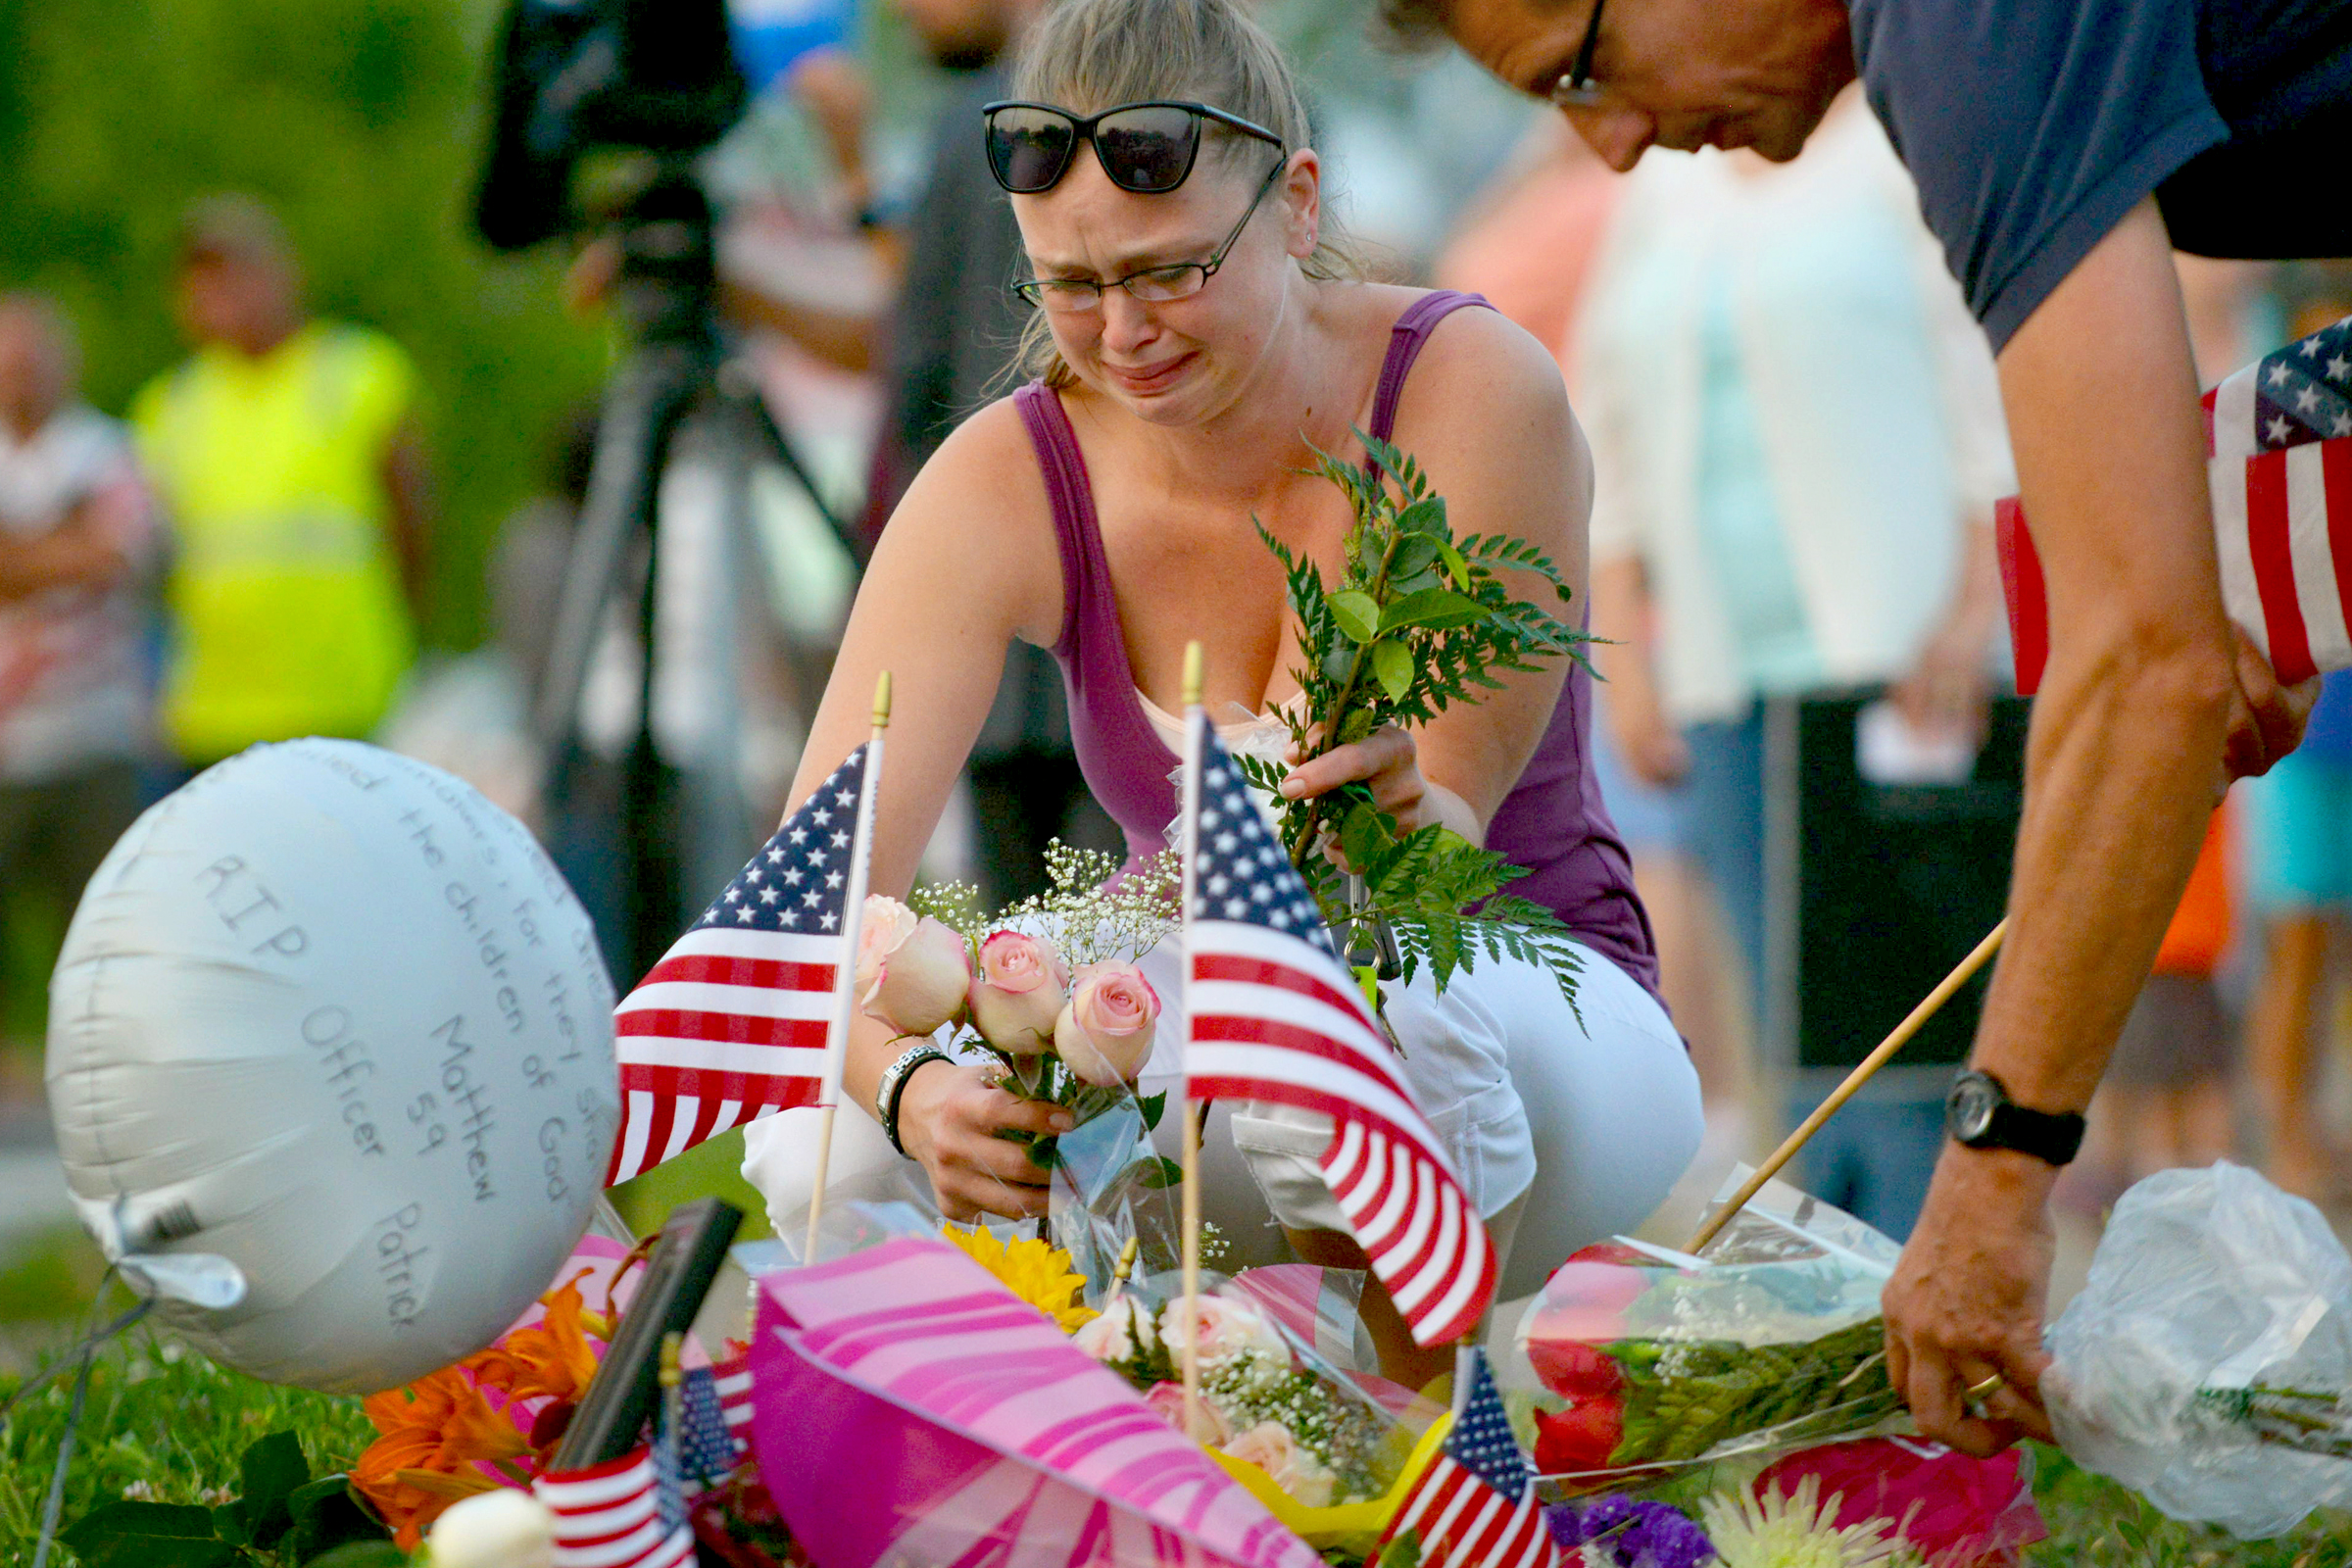 PHOTO: Gail Krull of West St. Paul, Minn. cries as she lays a bouquet of roses on a makeshift memorial following a fatal shooting in West St. Paul, Minn., July 30, 2014.